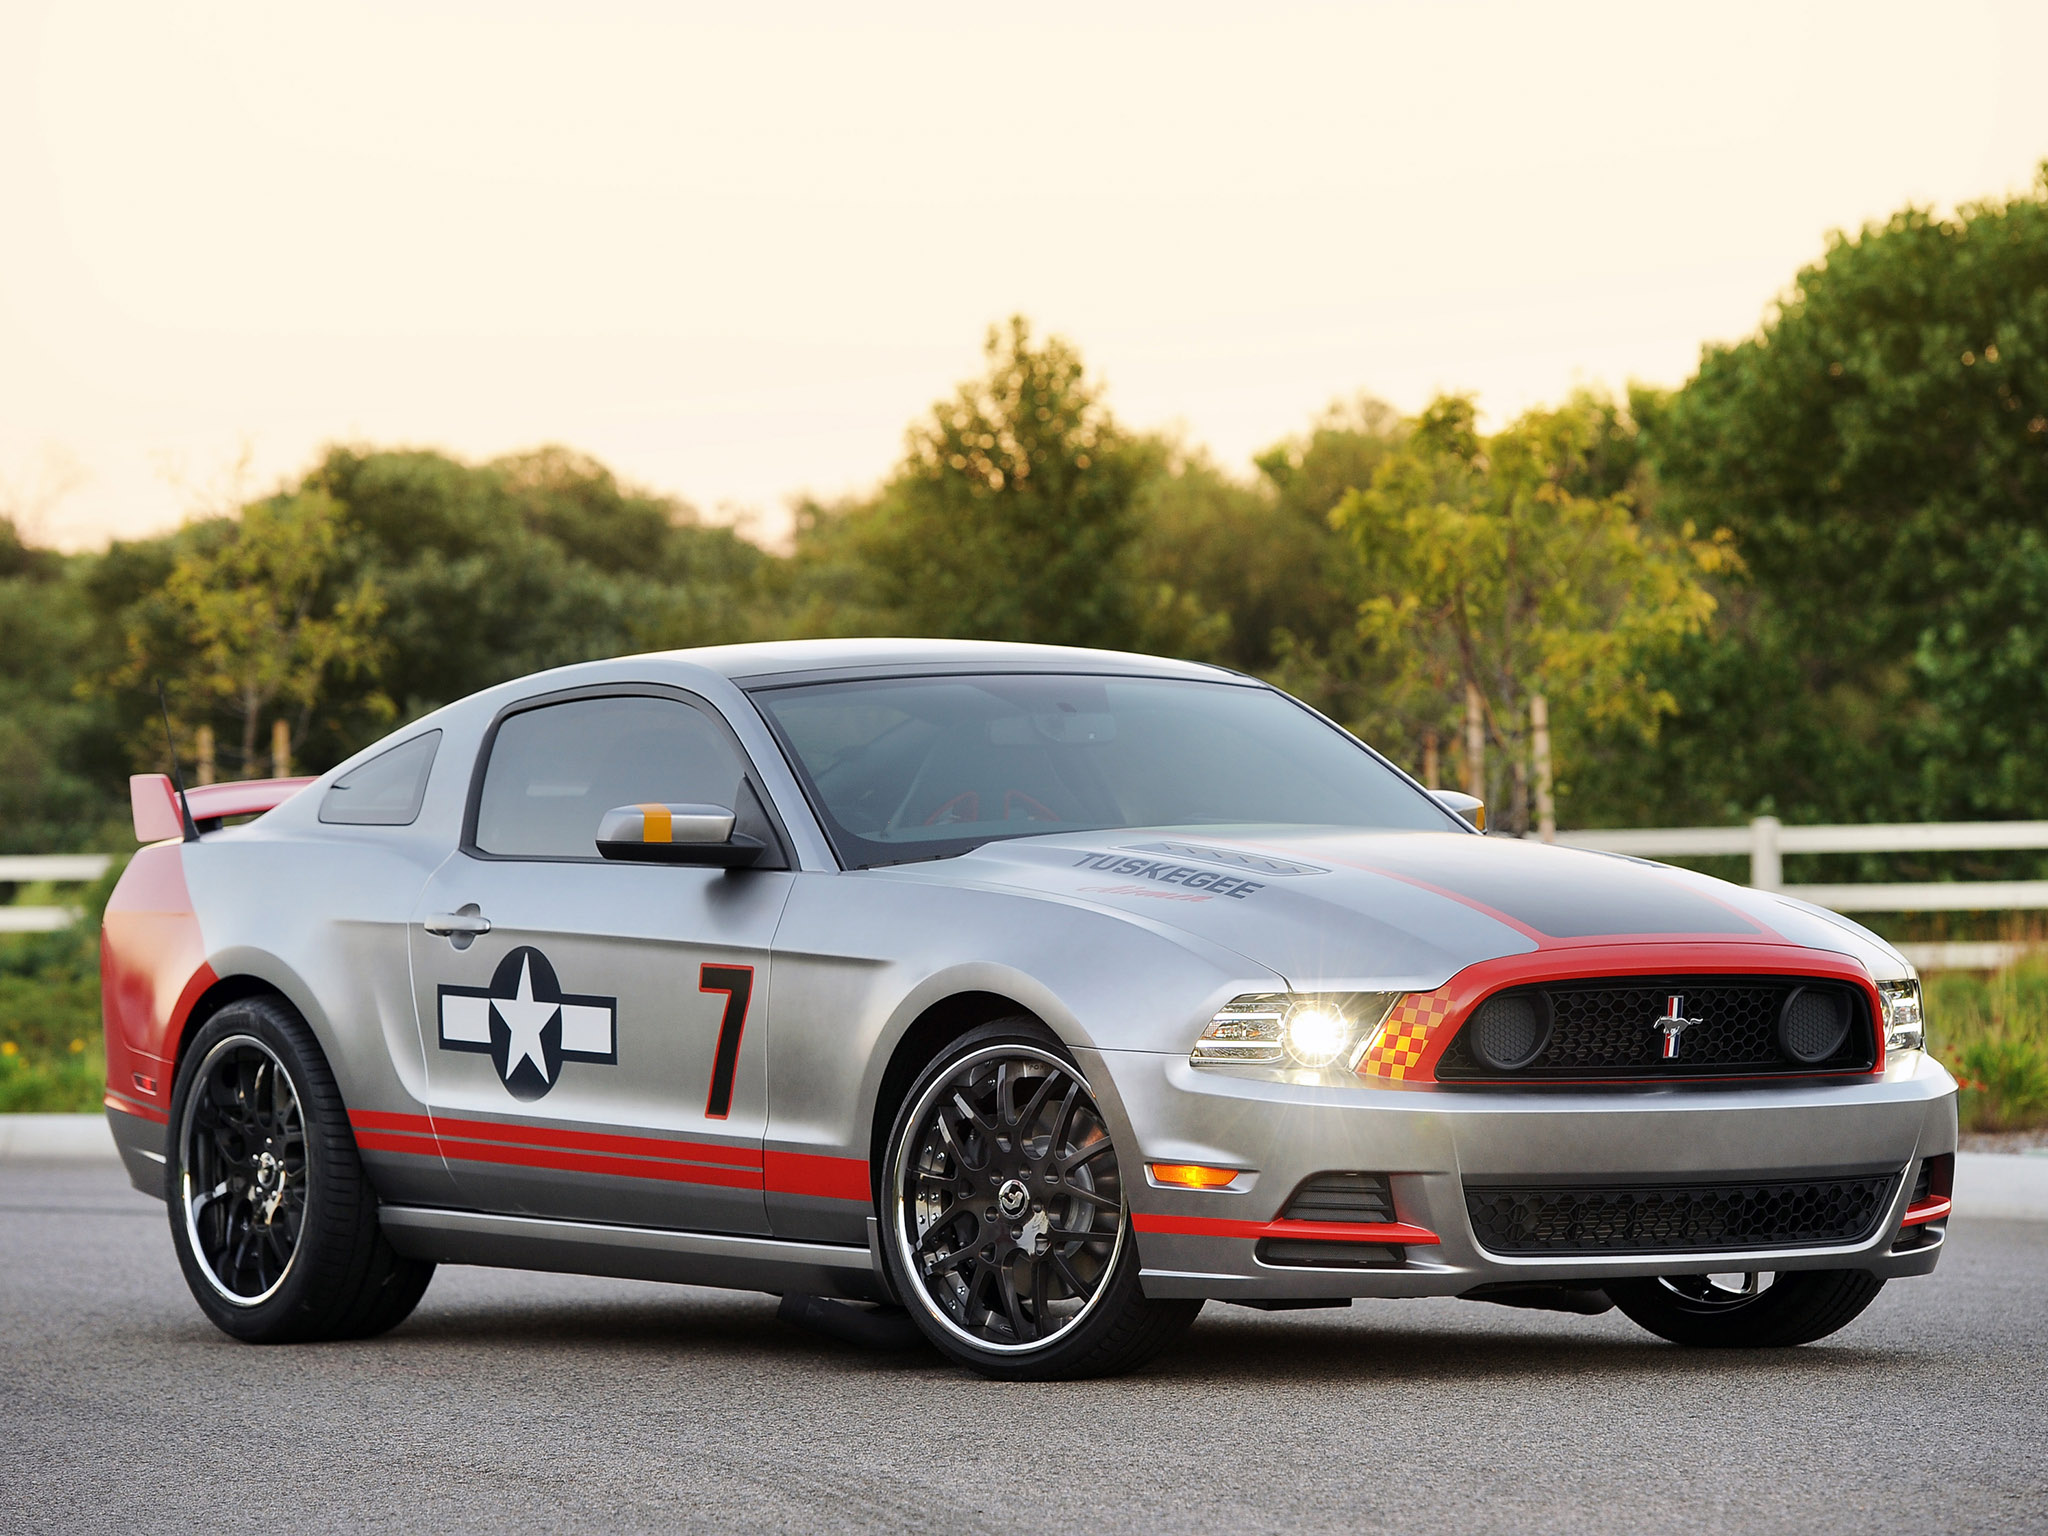 2013, Ford, Mustang, Gt, Red, Tails, Muscle, Tuning Wallpaper